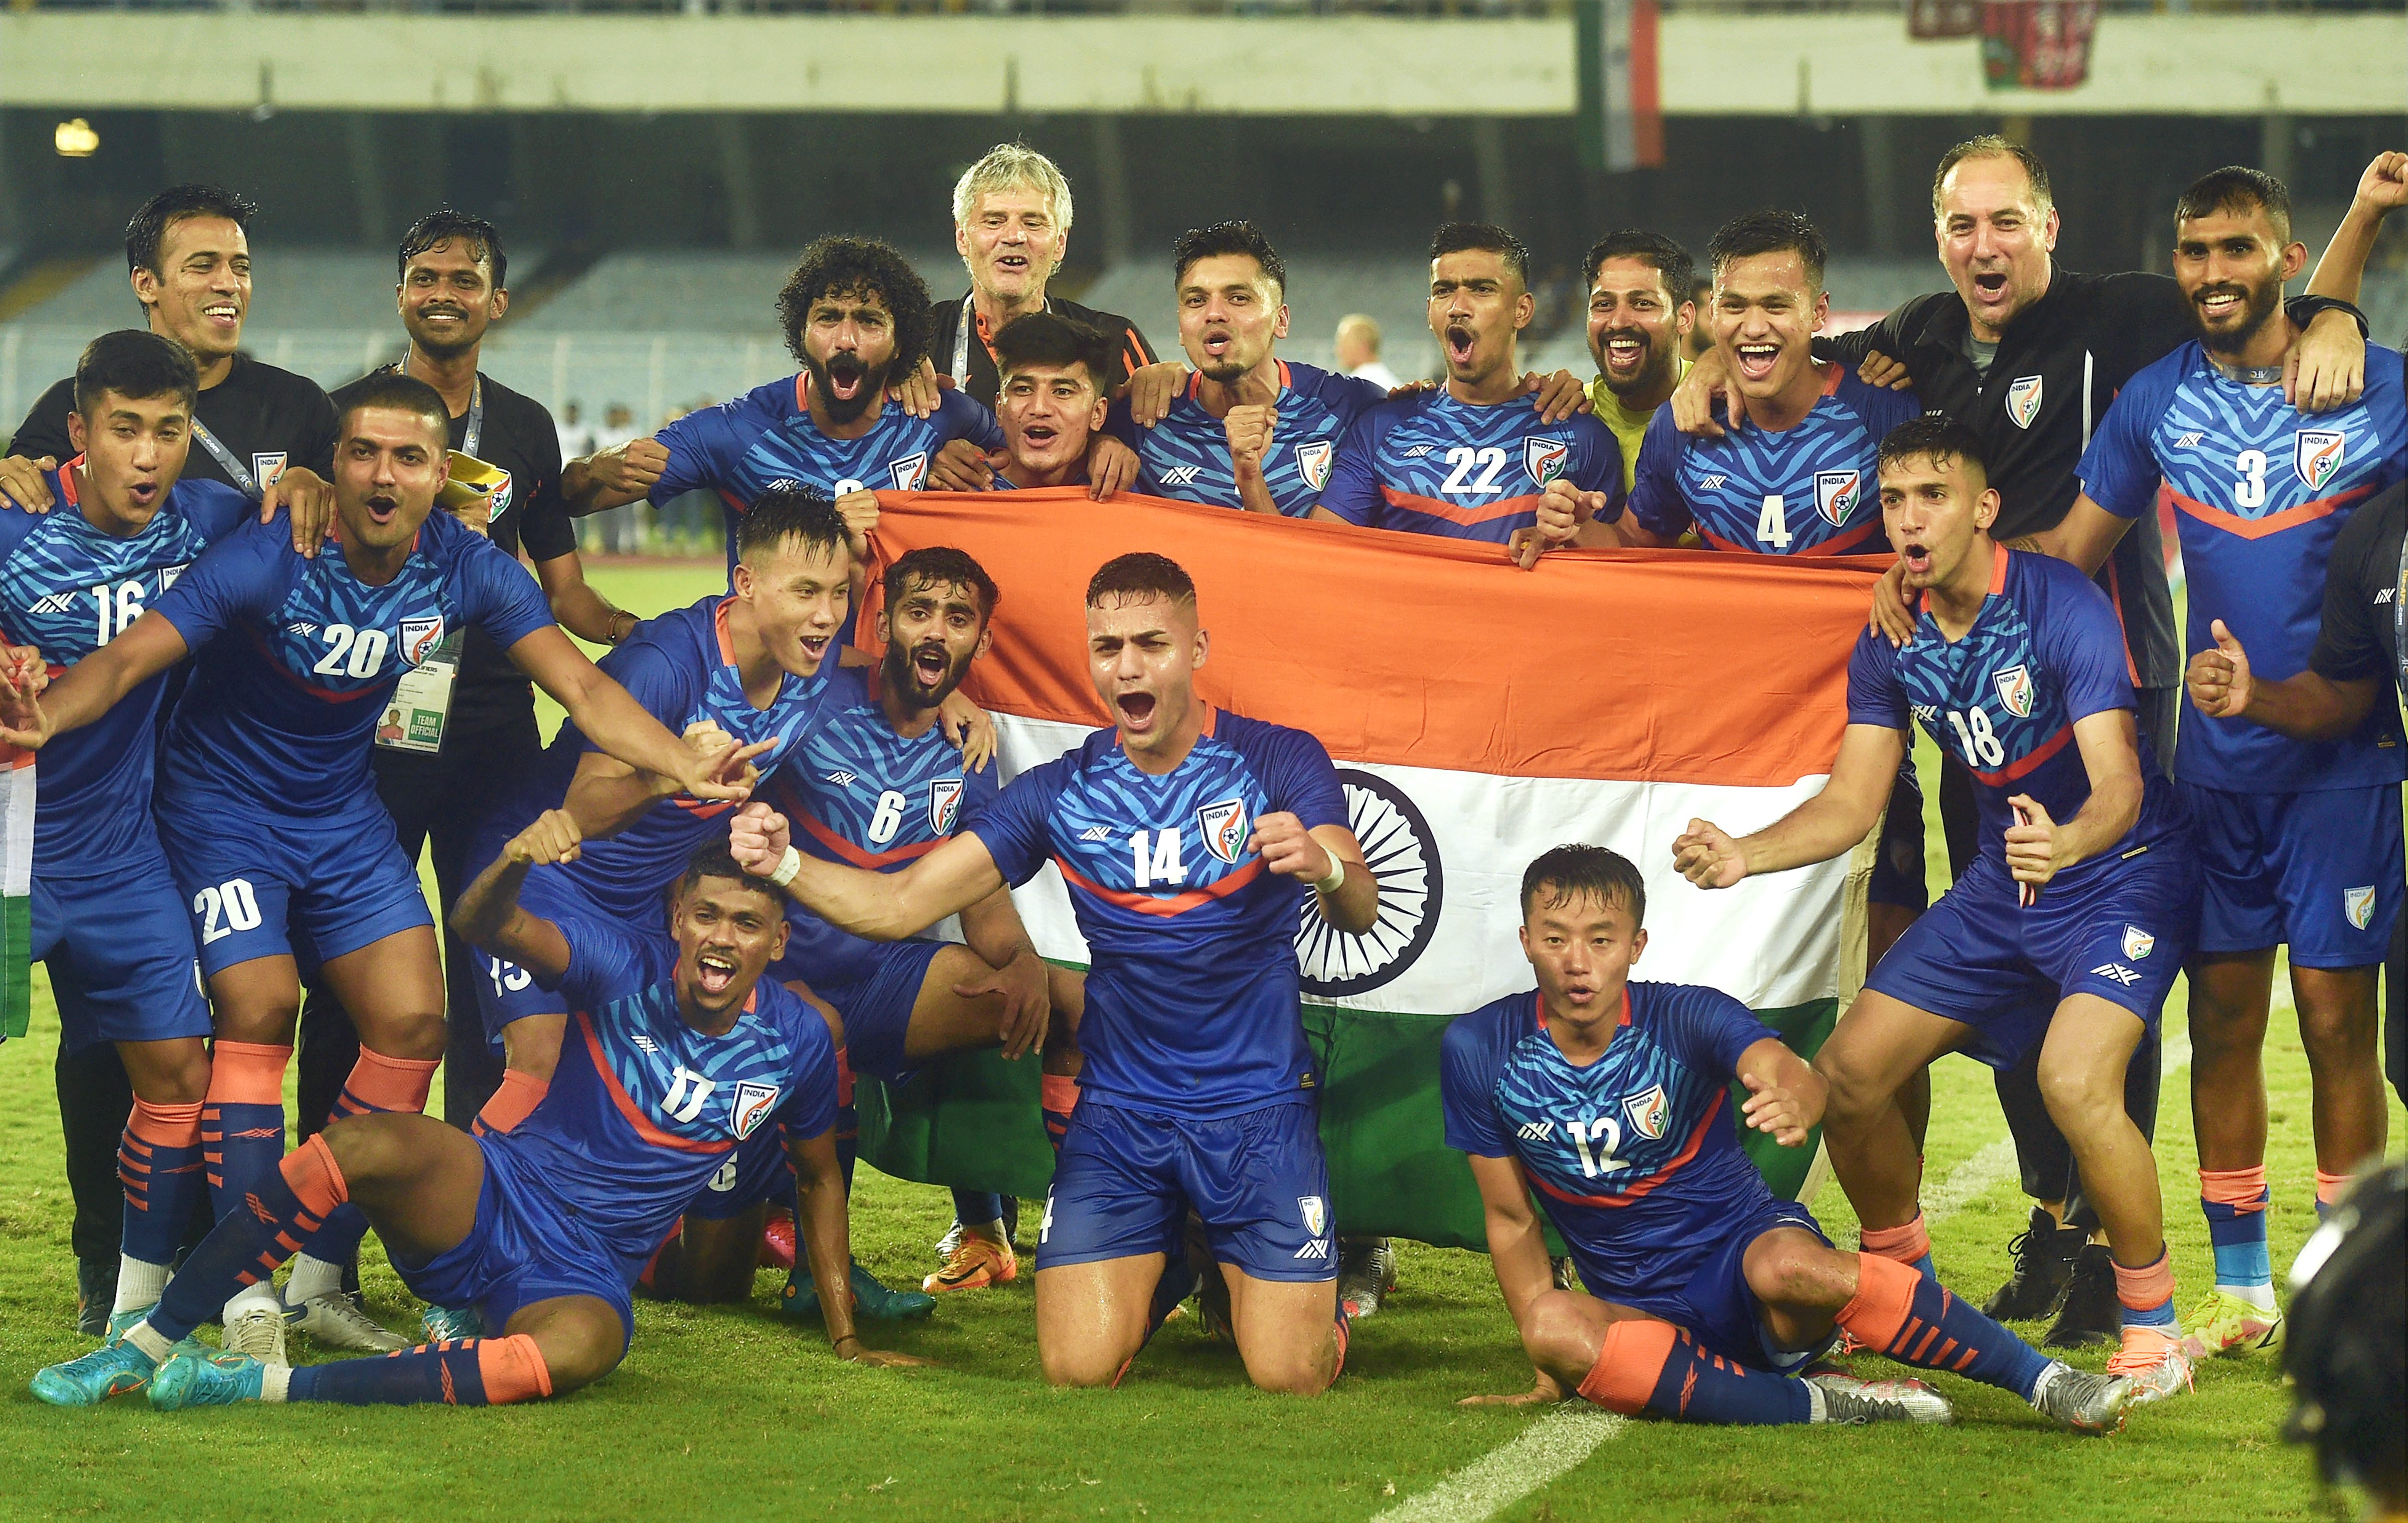 Truth be told...': Indian football team coach Stimac speaks harsh truths about the state of the sport